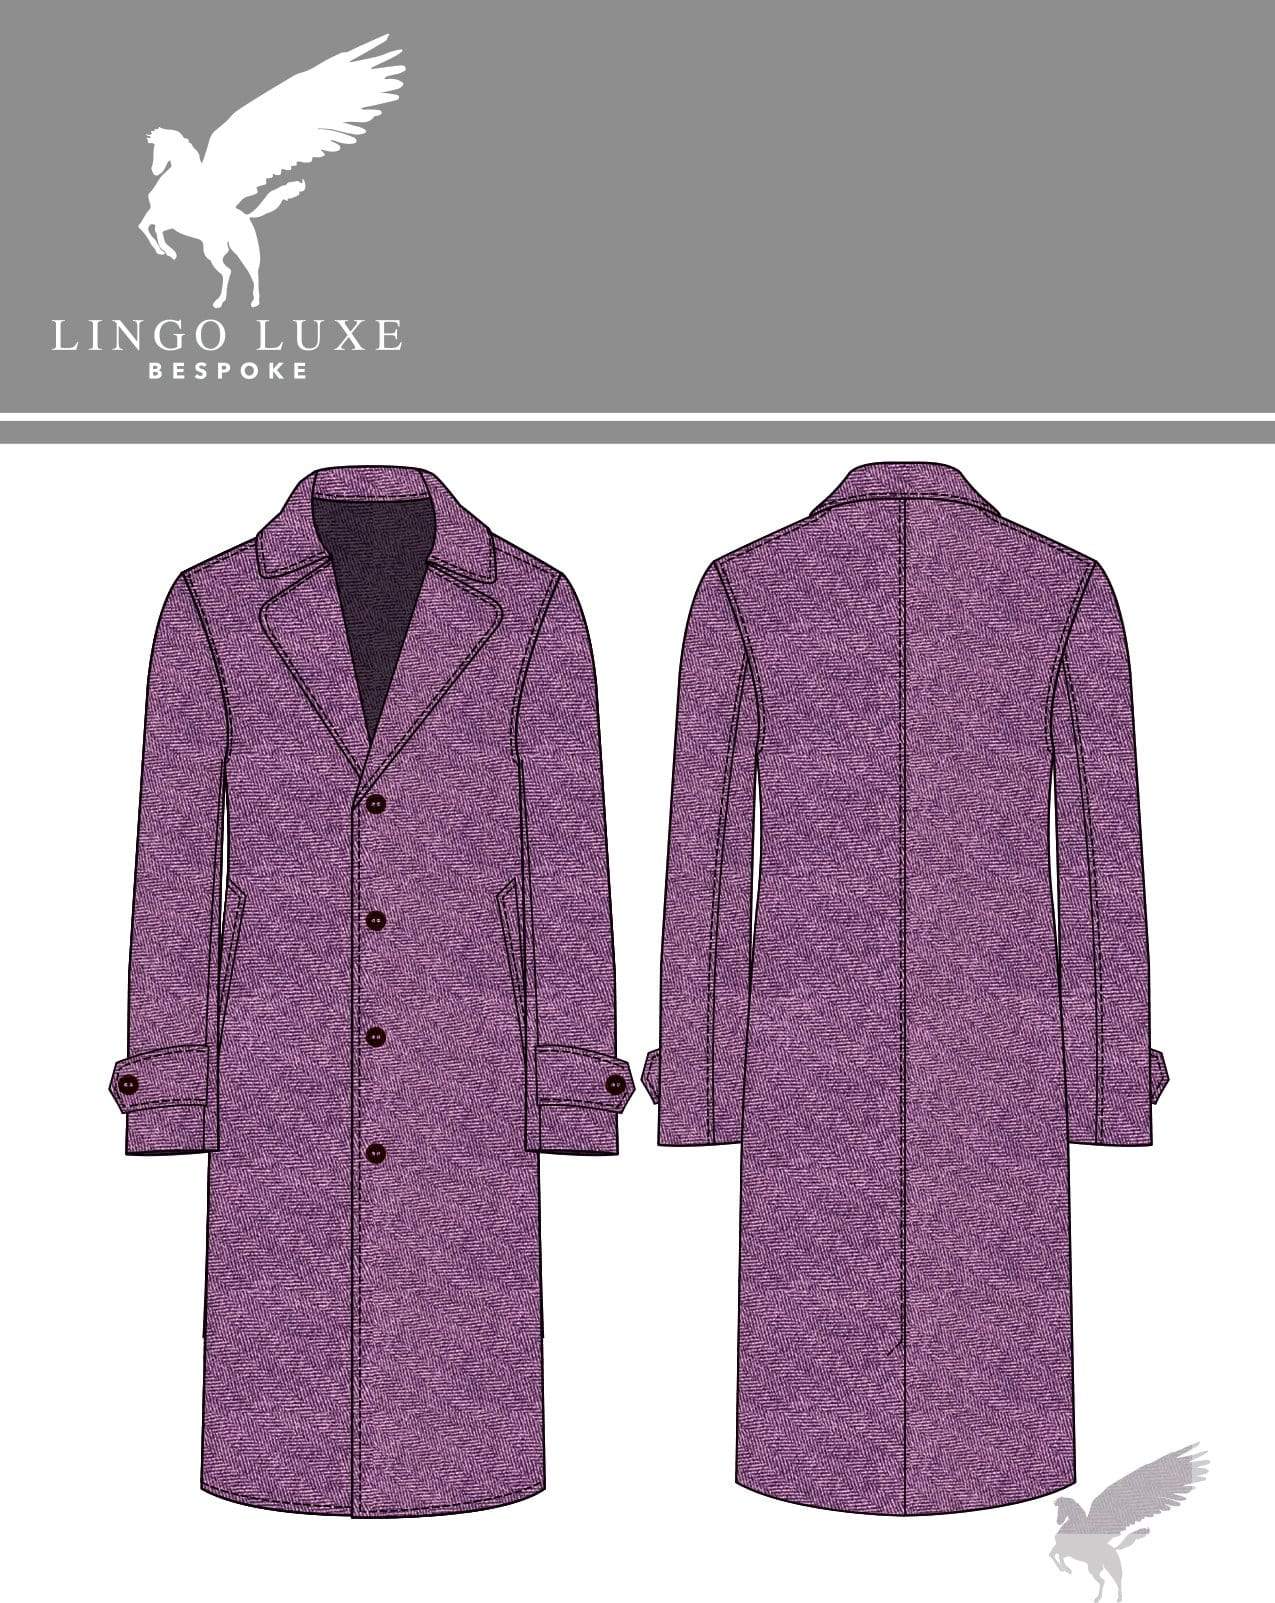 Outerwear | Lingo Luxe The Stately Overcoat | Mauve Herring-Lingo Luxe Bespoke